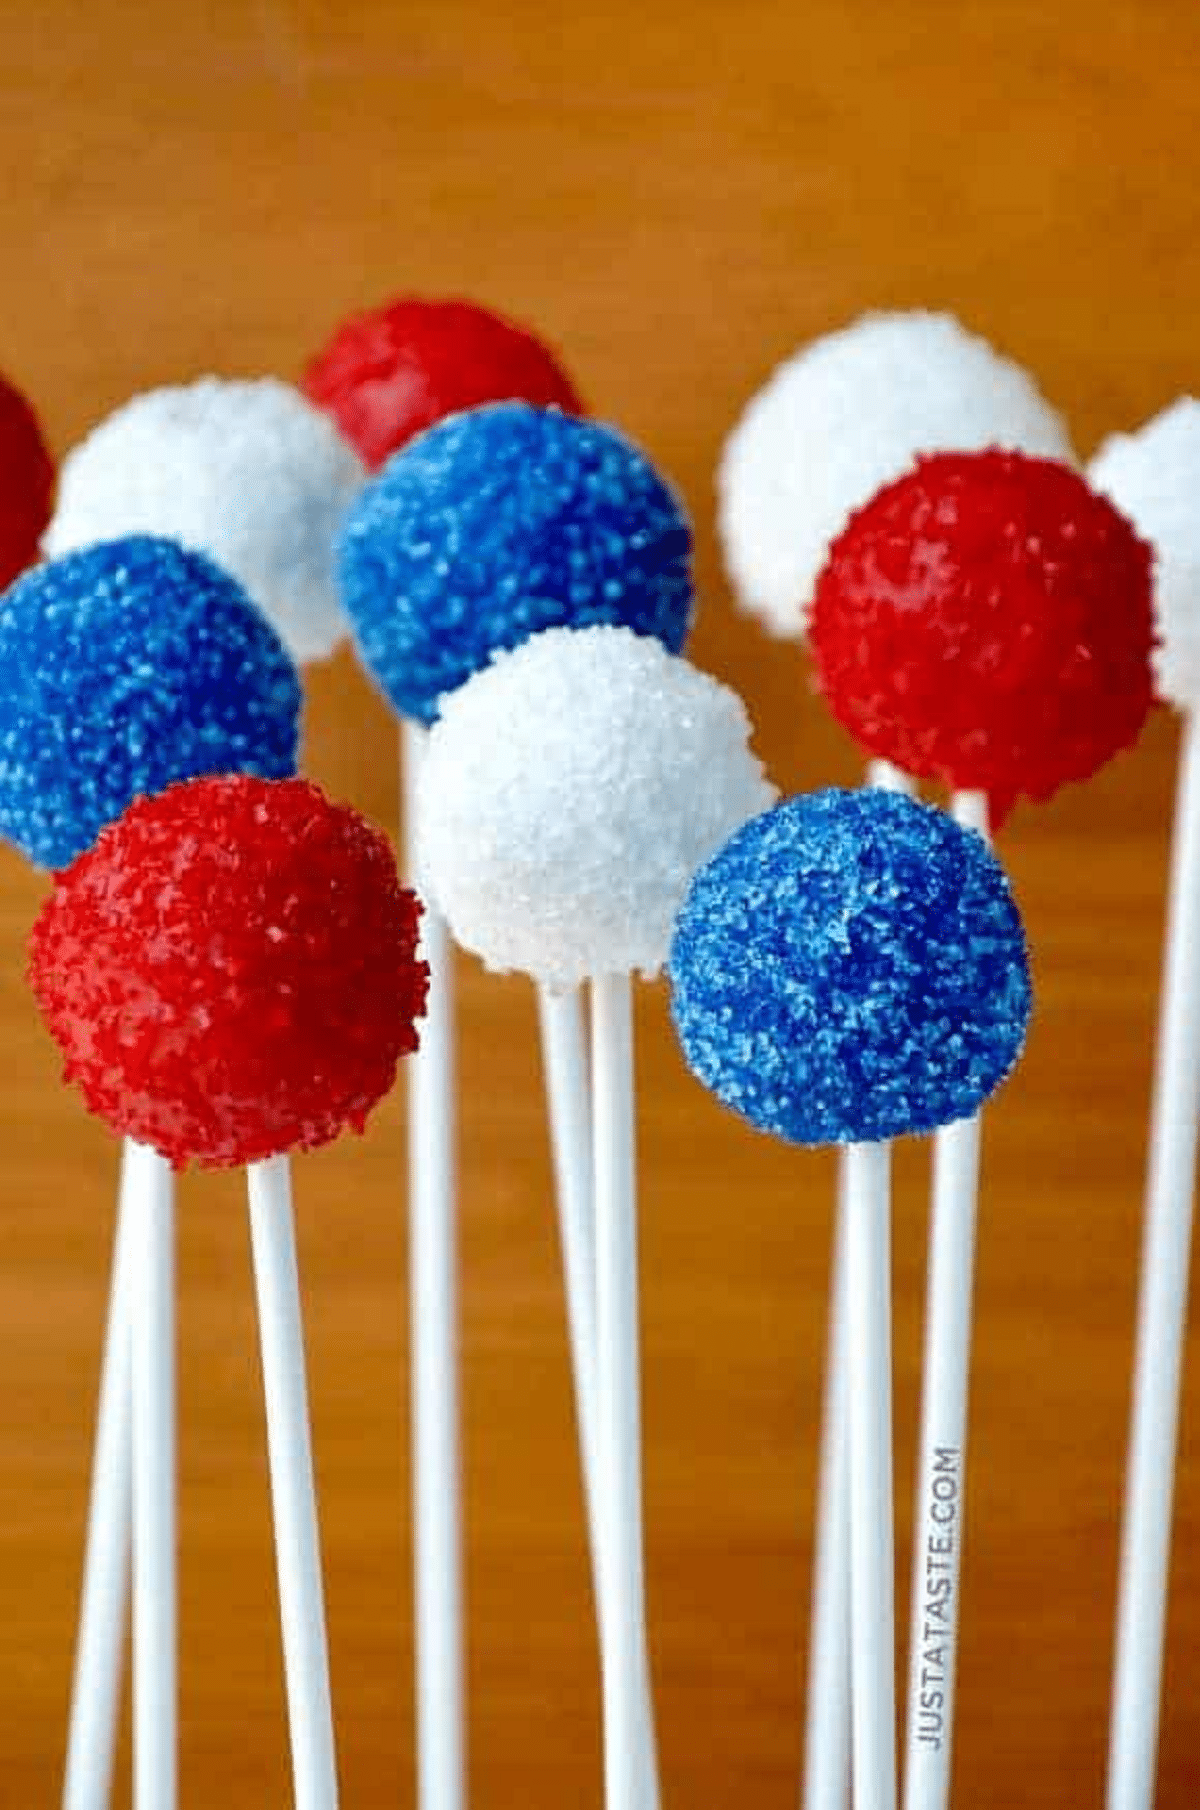 Red white and blue cake pops against wood wall